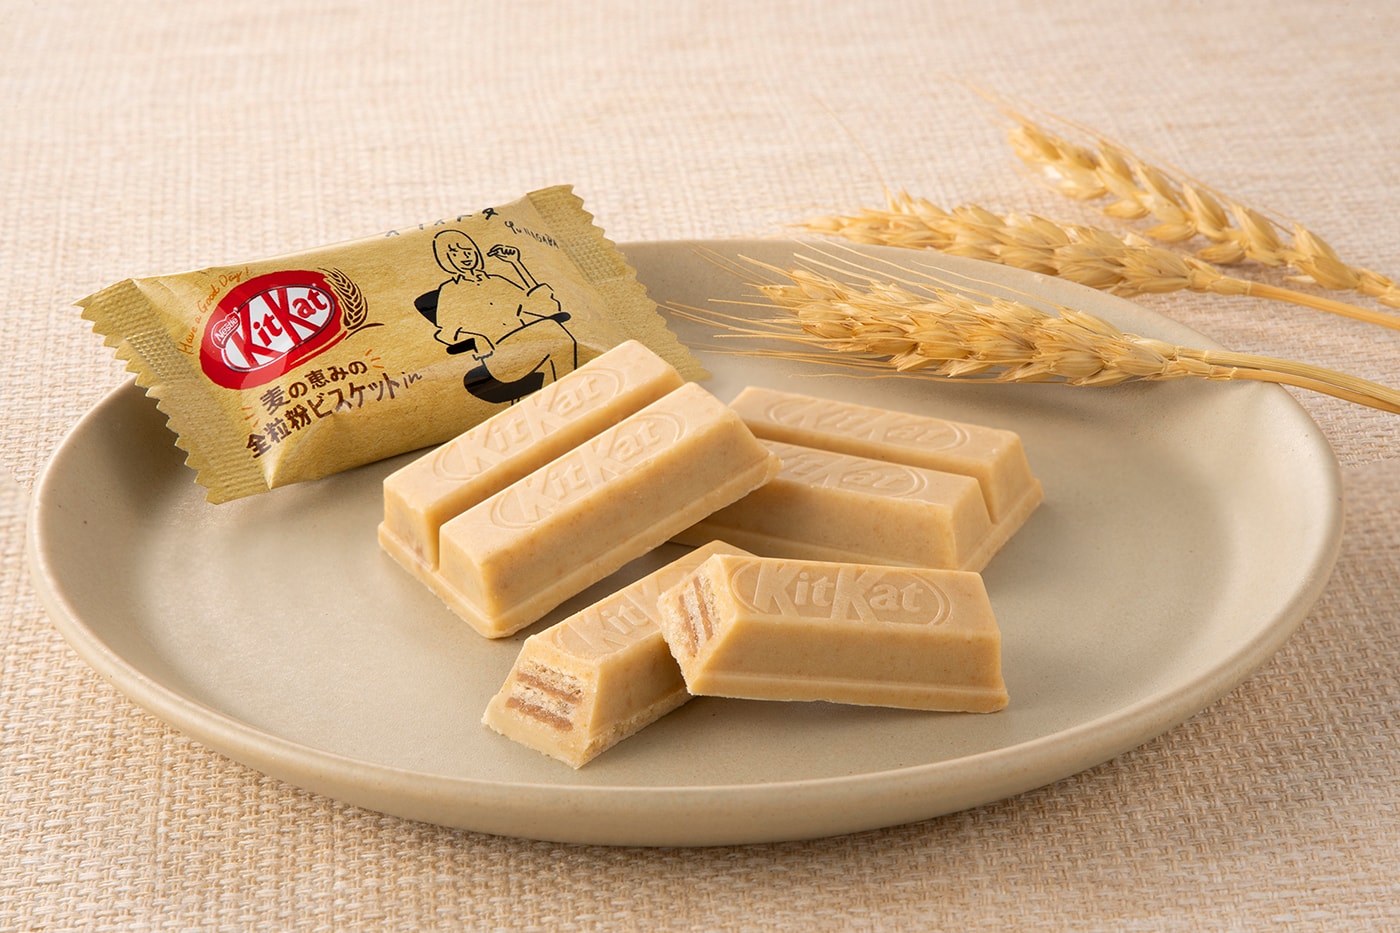 Kit Kat Mini Ice Cream Bars Are Rumored To Be Hitting Stores Soon